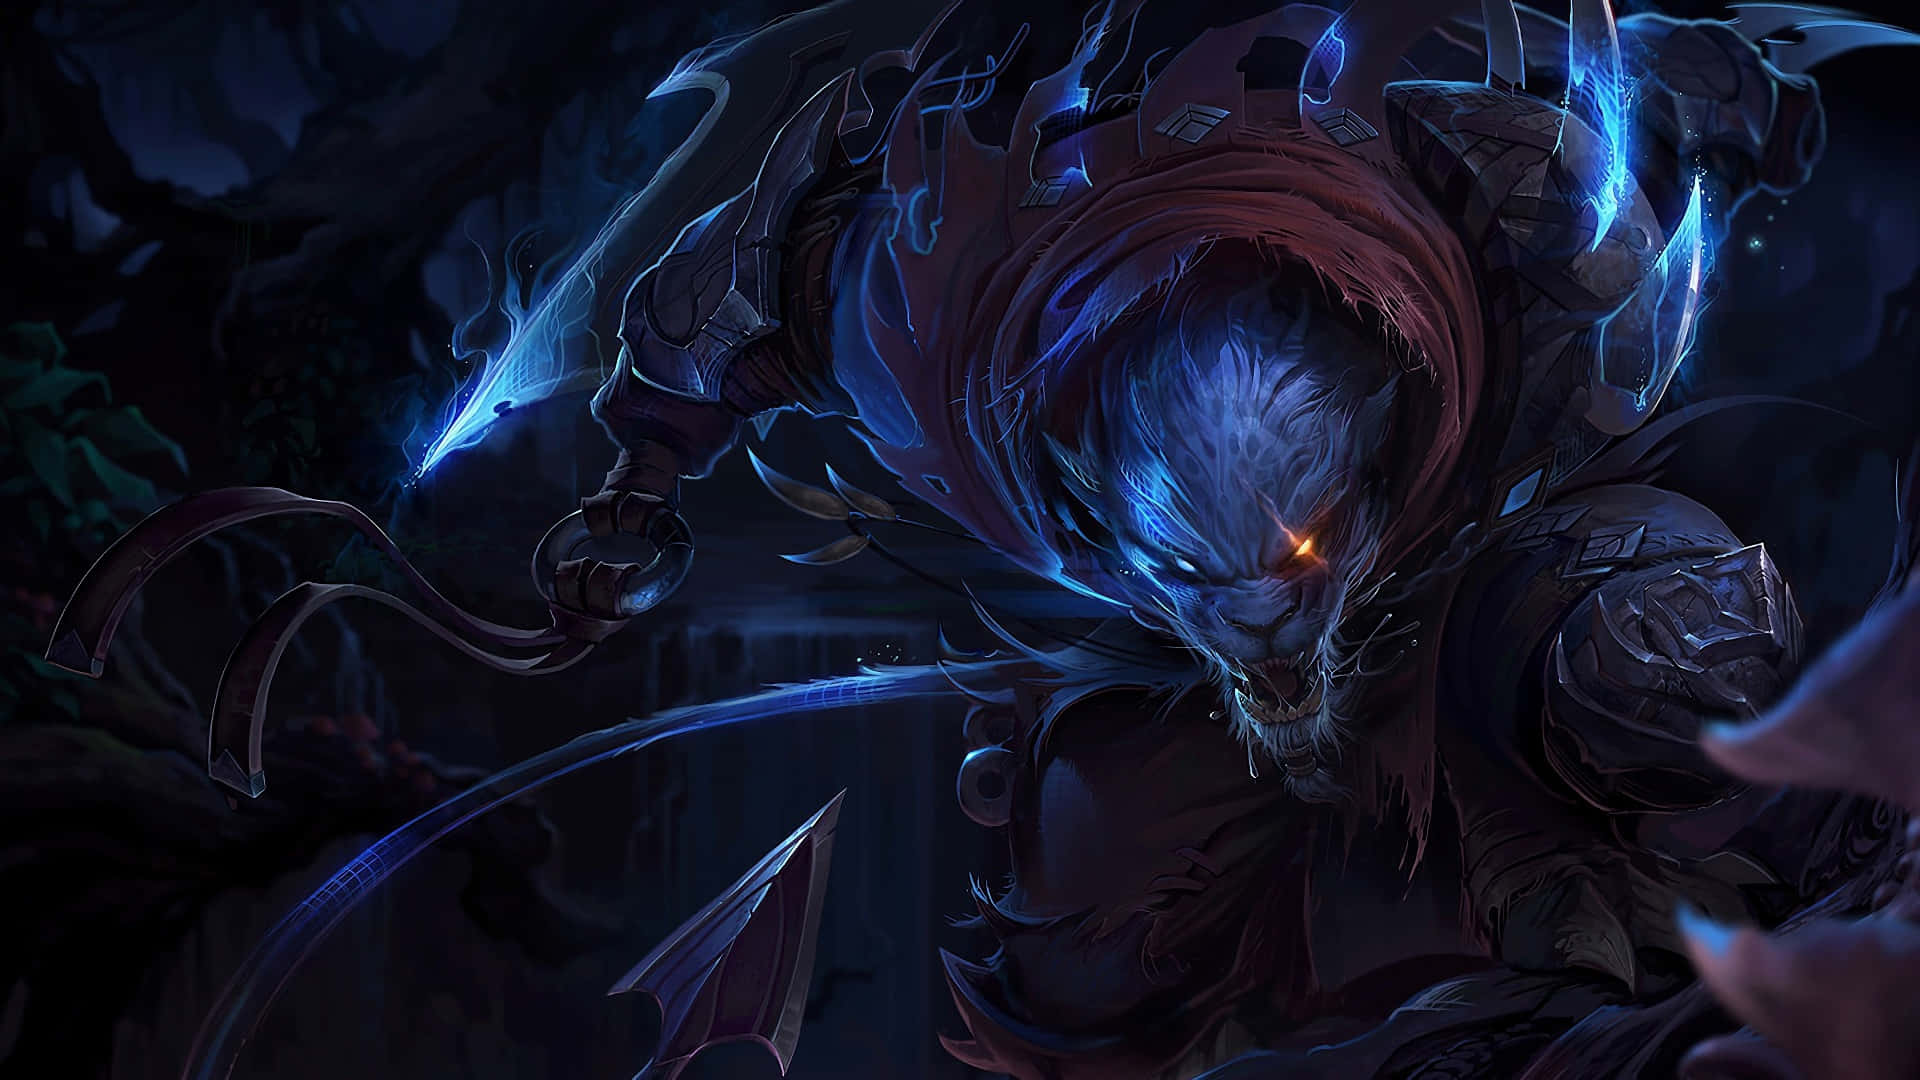 Level up your experience in League of Legends with the perfect laptop Wallpaper